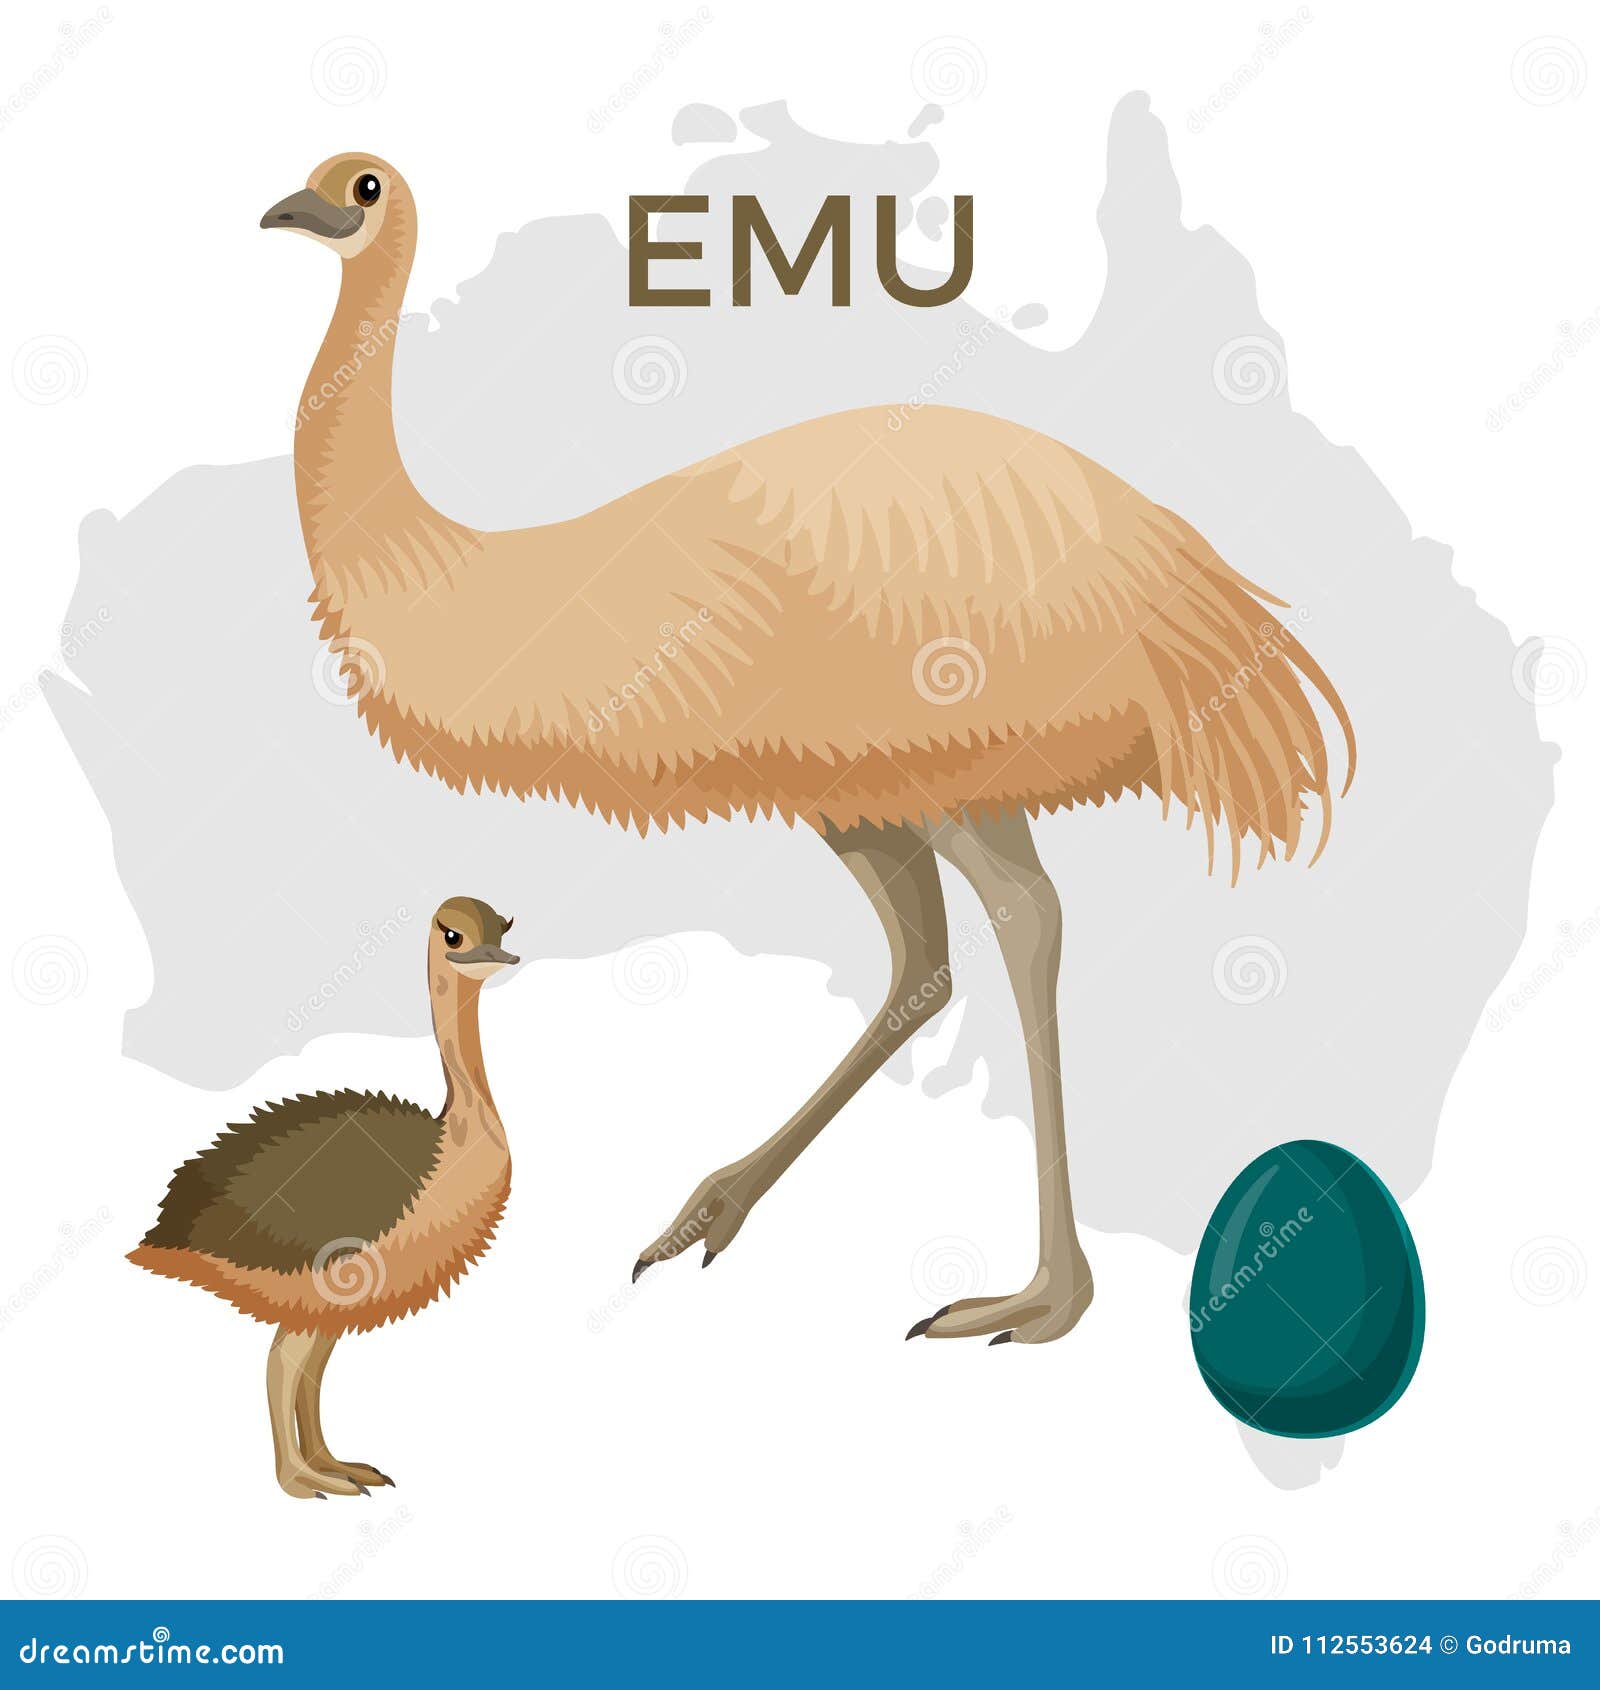 emu bird, small and large  on white, small chick